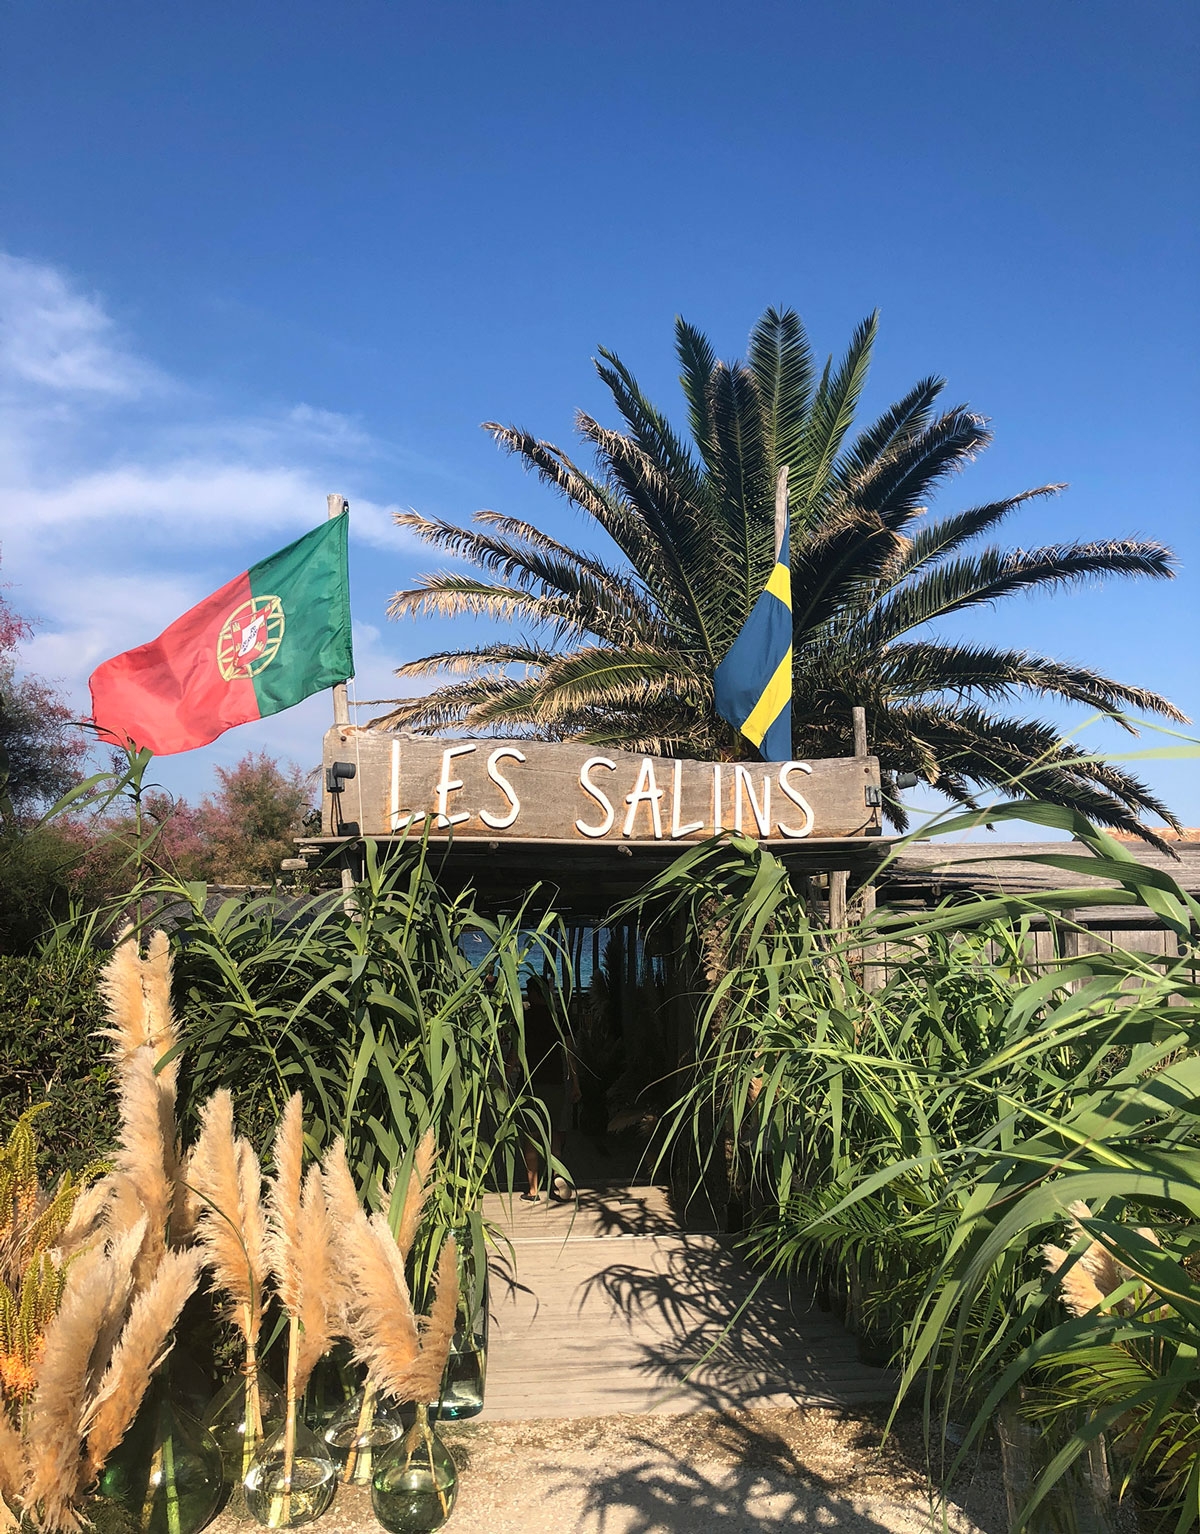 The signed entrance to Les Salins is surrounded by dense fauna and two raised flags